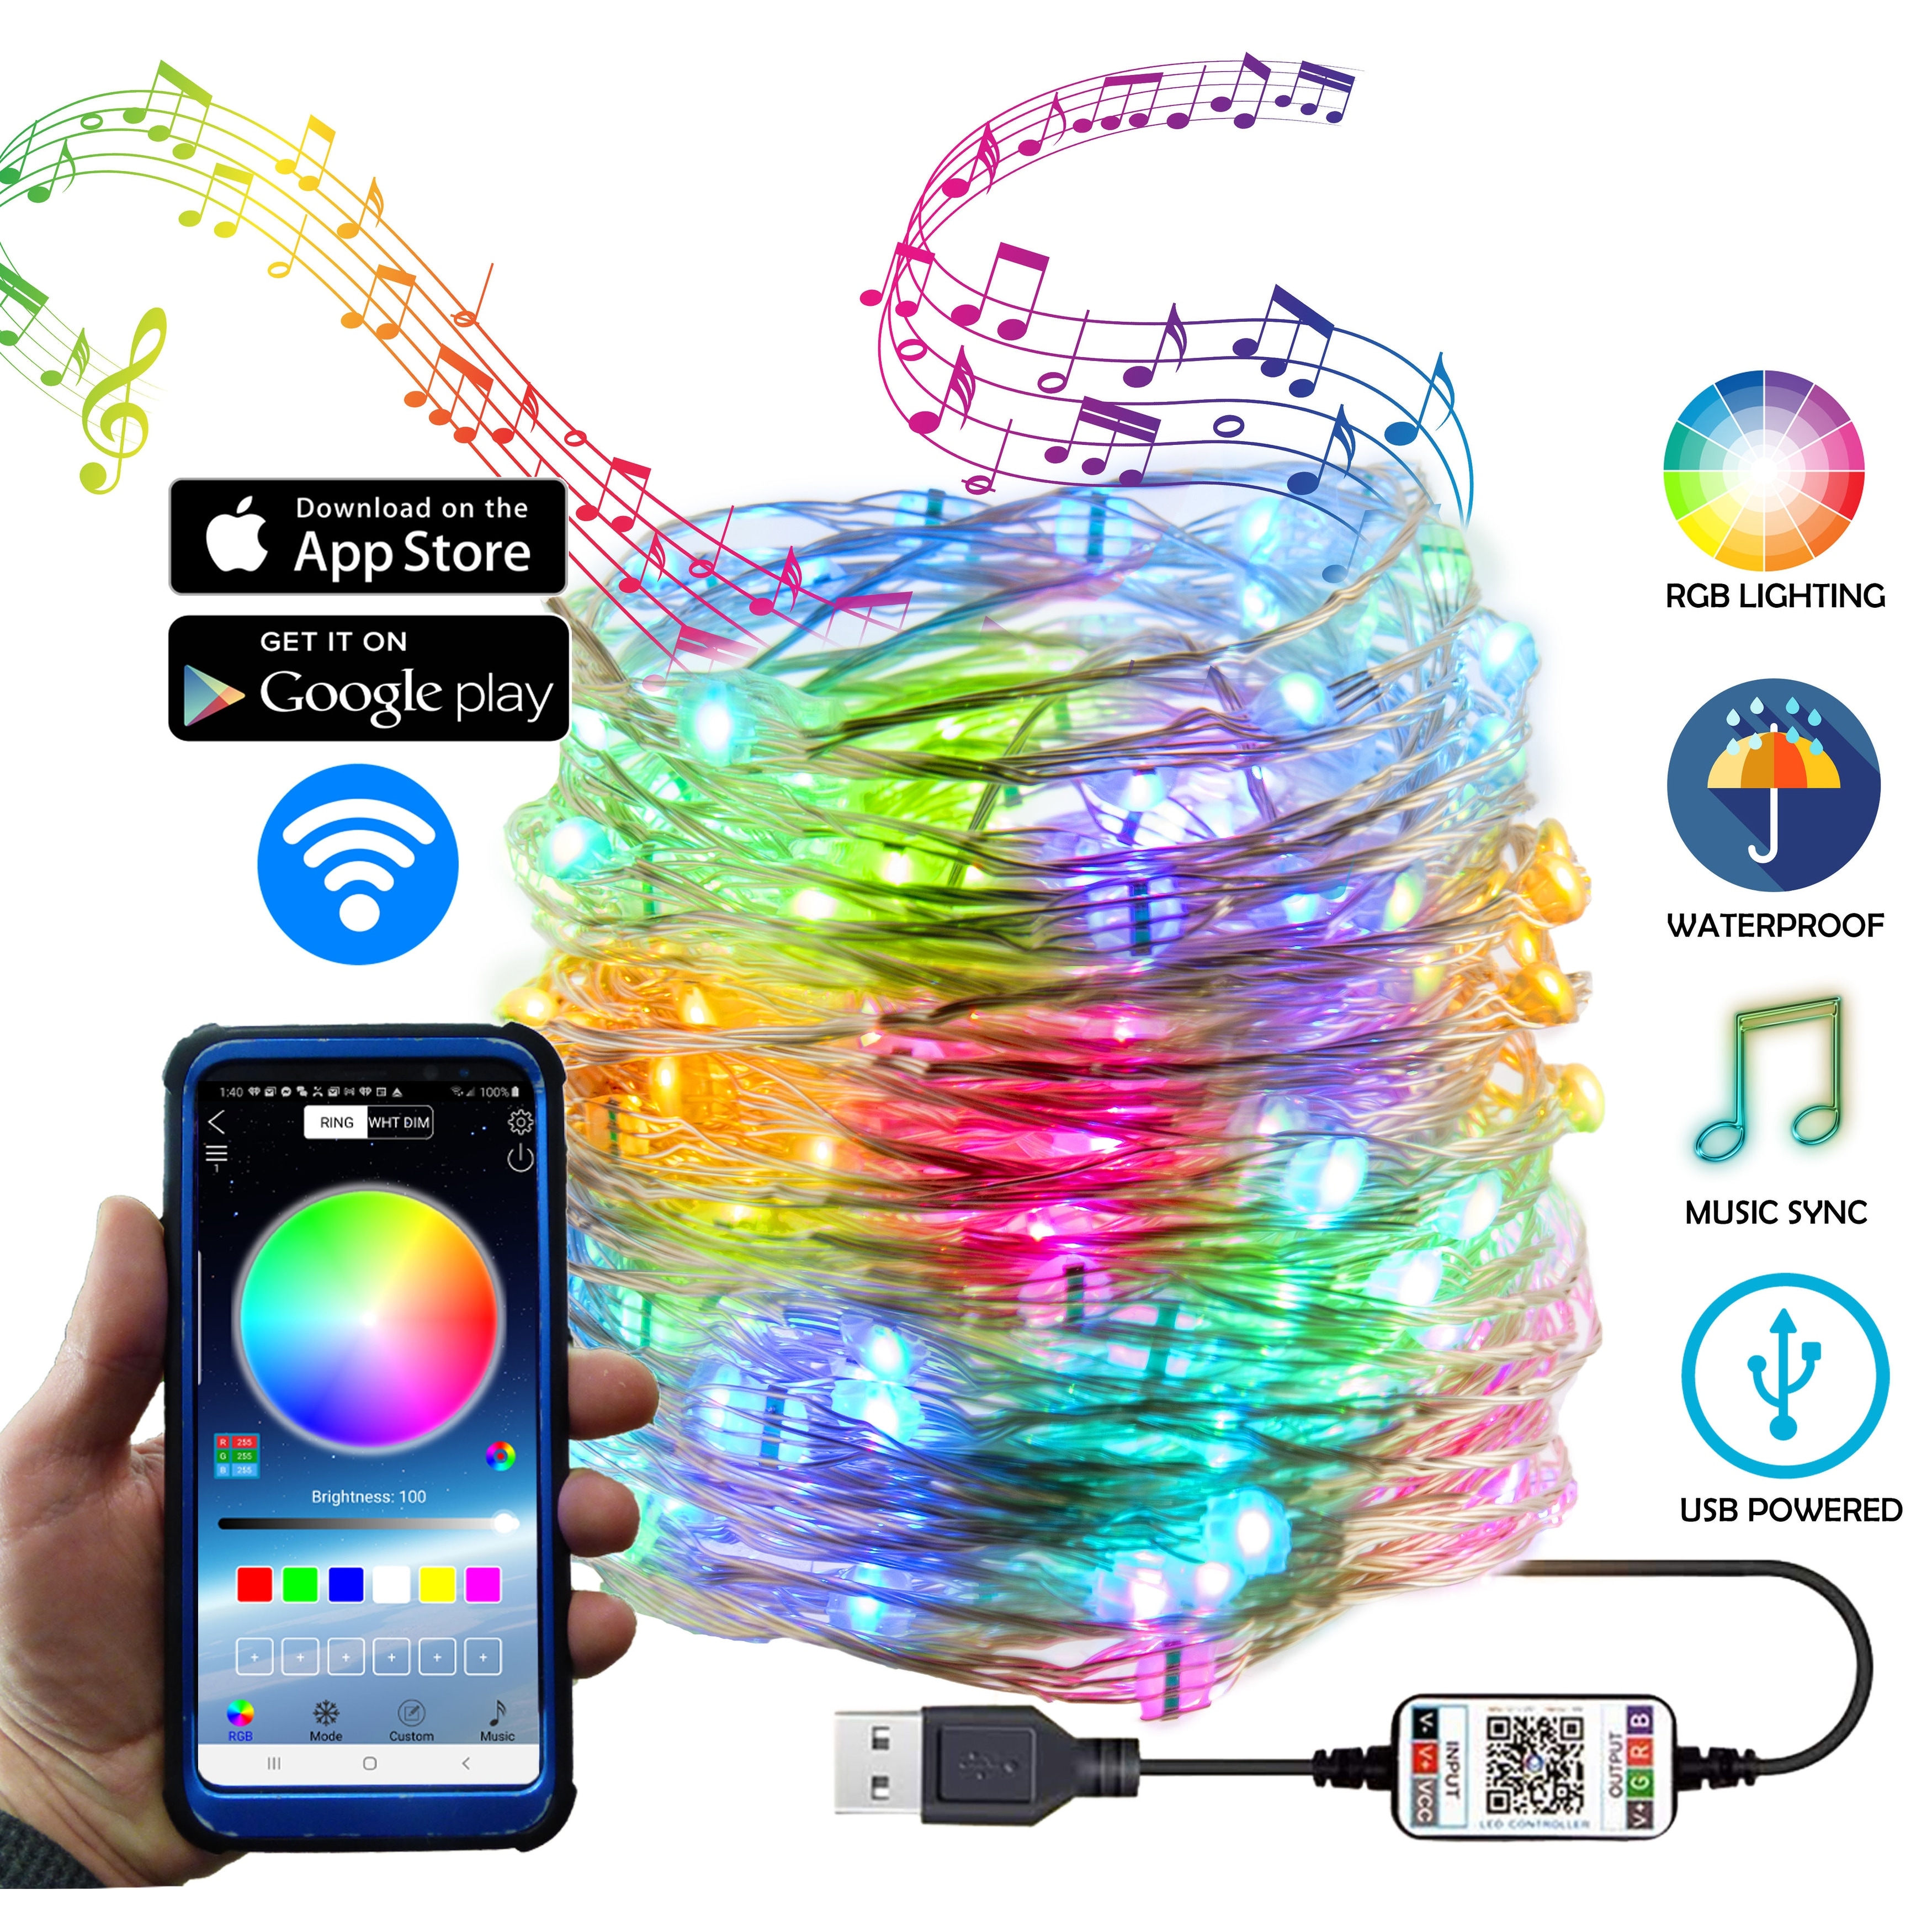 https://ak1.ostkcdn.com/images/products/is/images/direct/8a17ed47f2bf470fa8f3c25e2bc8ec0d0ecbd849/Fairy-String-Bluetooth-RGB-LED-Lights-Indoor-Outdoor-Waterproof-USB-Music-Sync.jpg